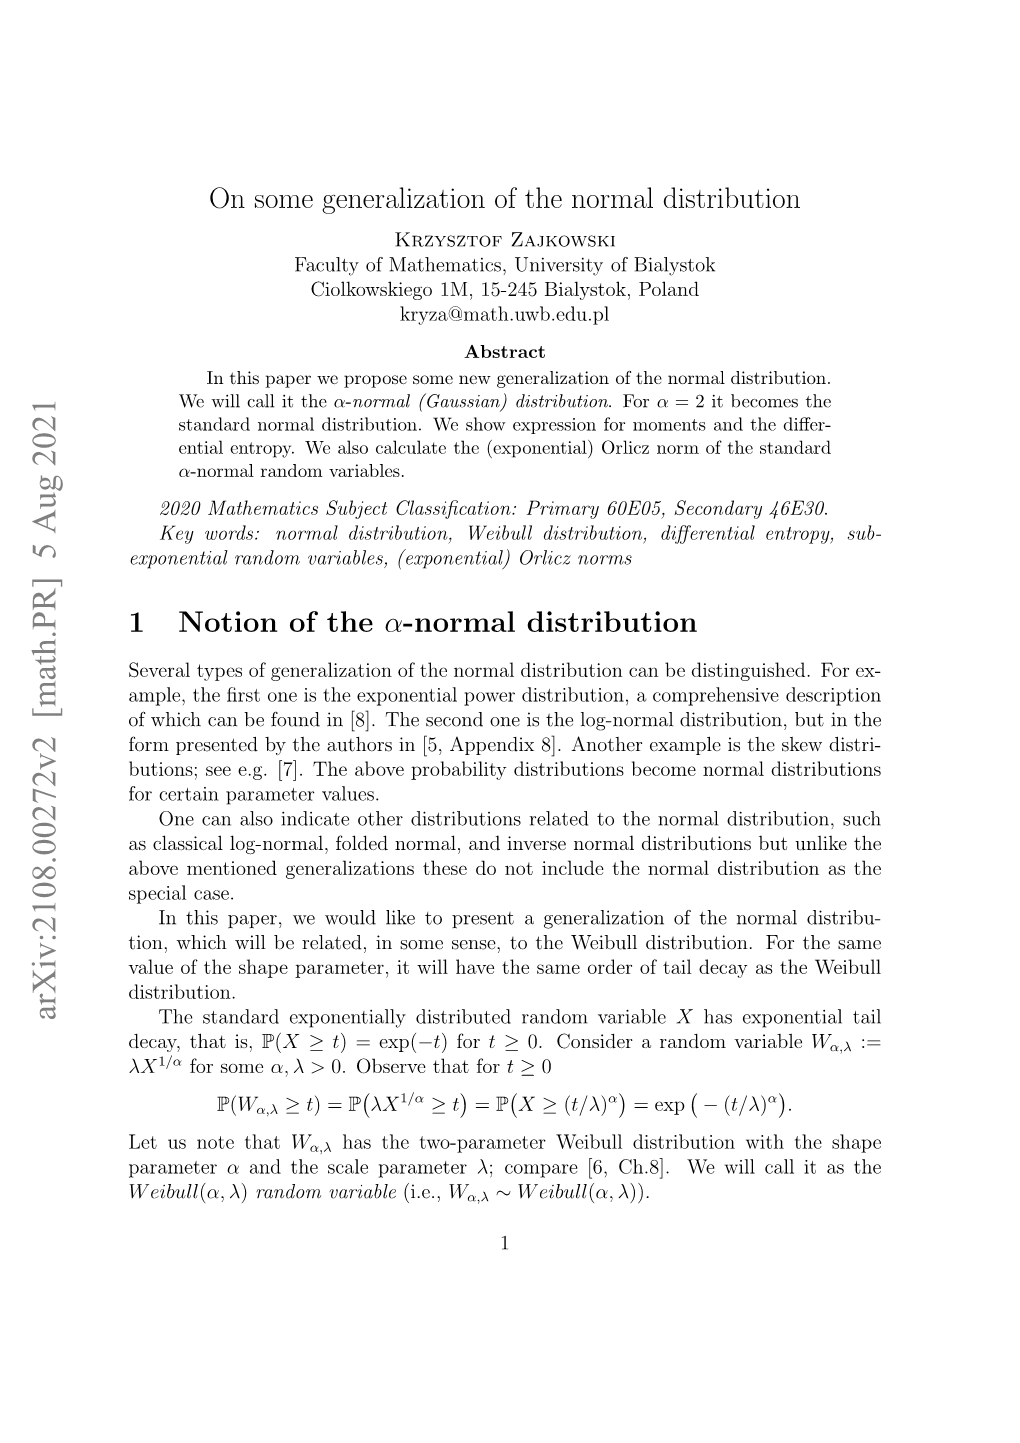 On Some Generalization of the Normal Distribution